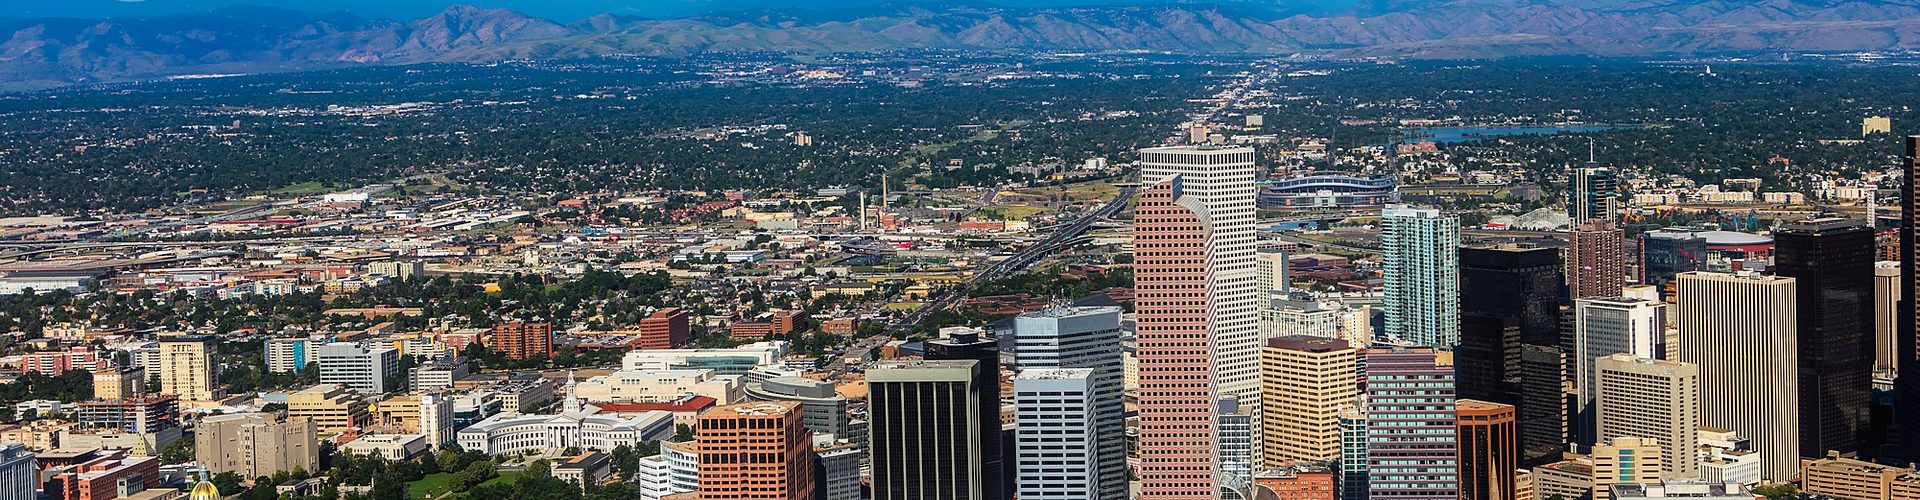 Moving to Denver - 10 Pros and Cons You Need to Know